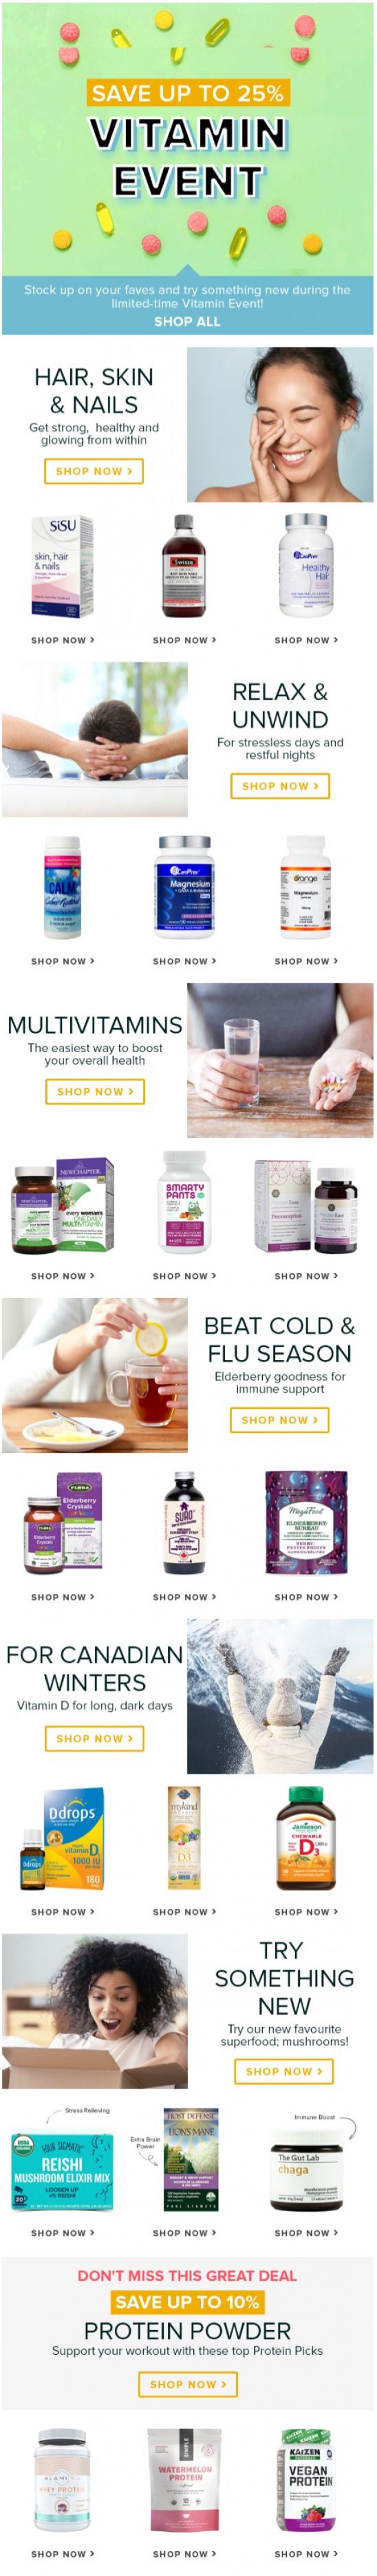 Coupon for: Well.ca - ONLY 5 DAYS LEFT: Save up to 25% off the Vitamin Event!